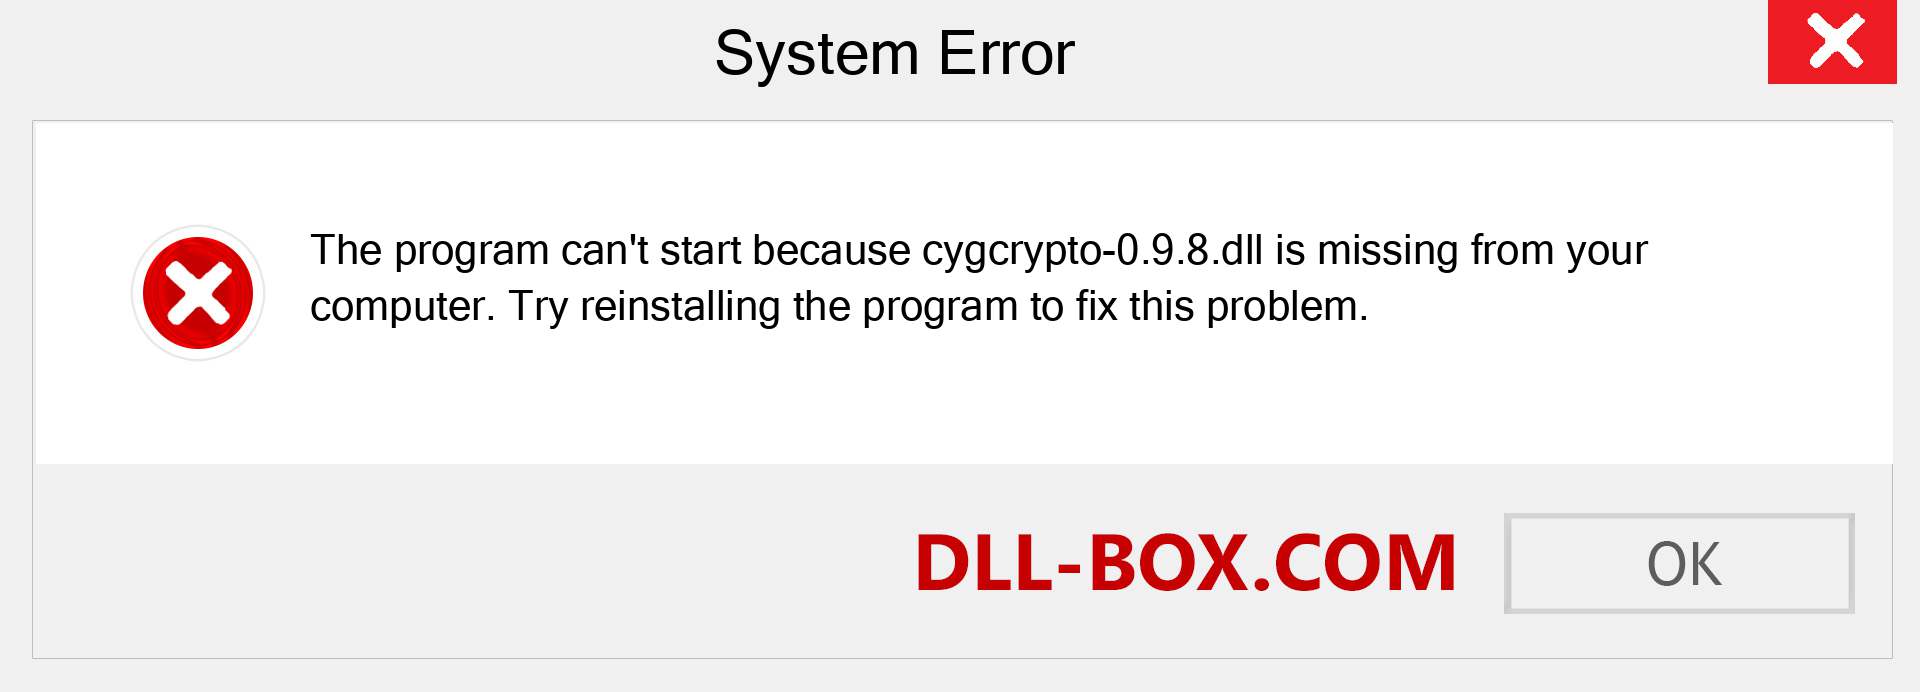  cygcrypto-0.9.8.dll file is missing?. Download for Windows 7, 8, 10 - Fix  cygcrypto-0.9.8 dll Missing Error on Windows, photos, images